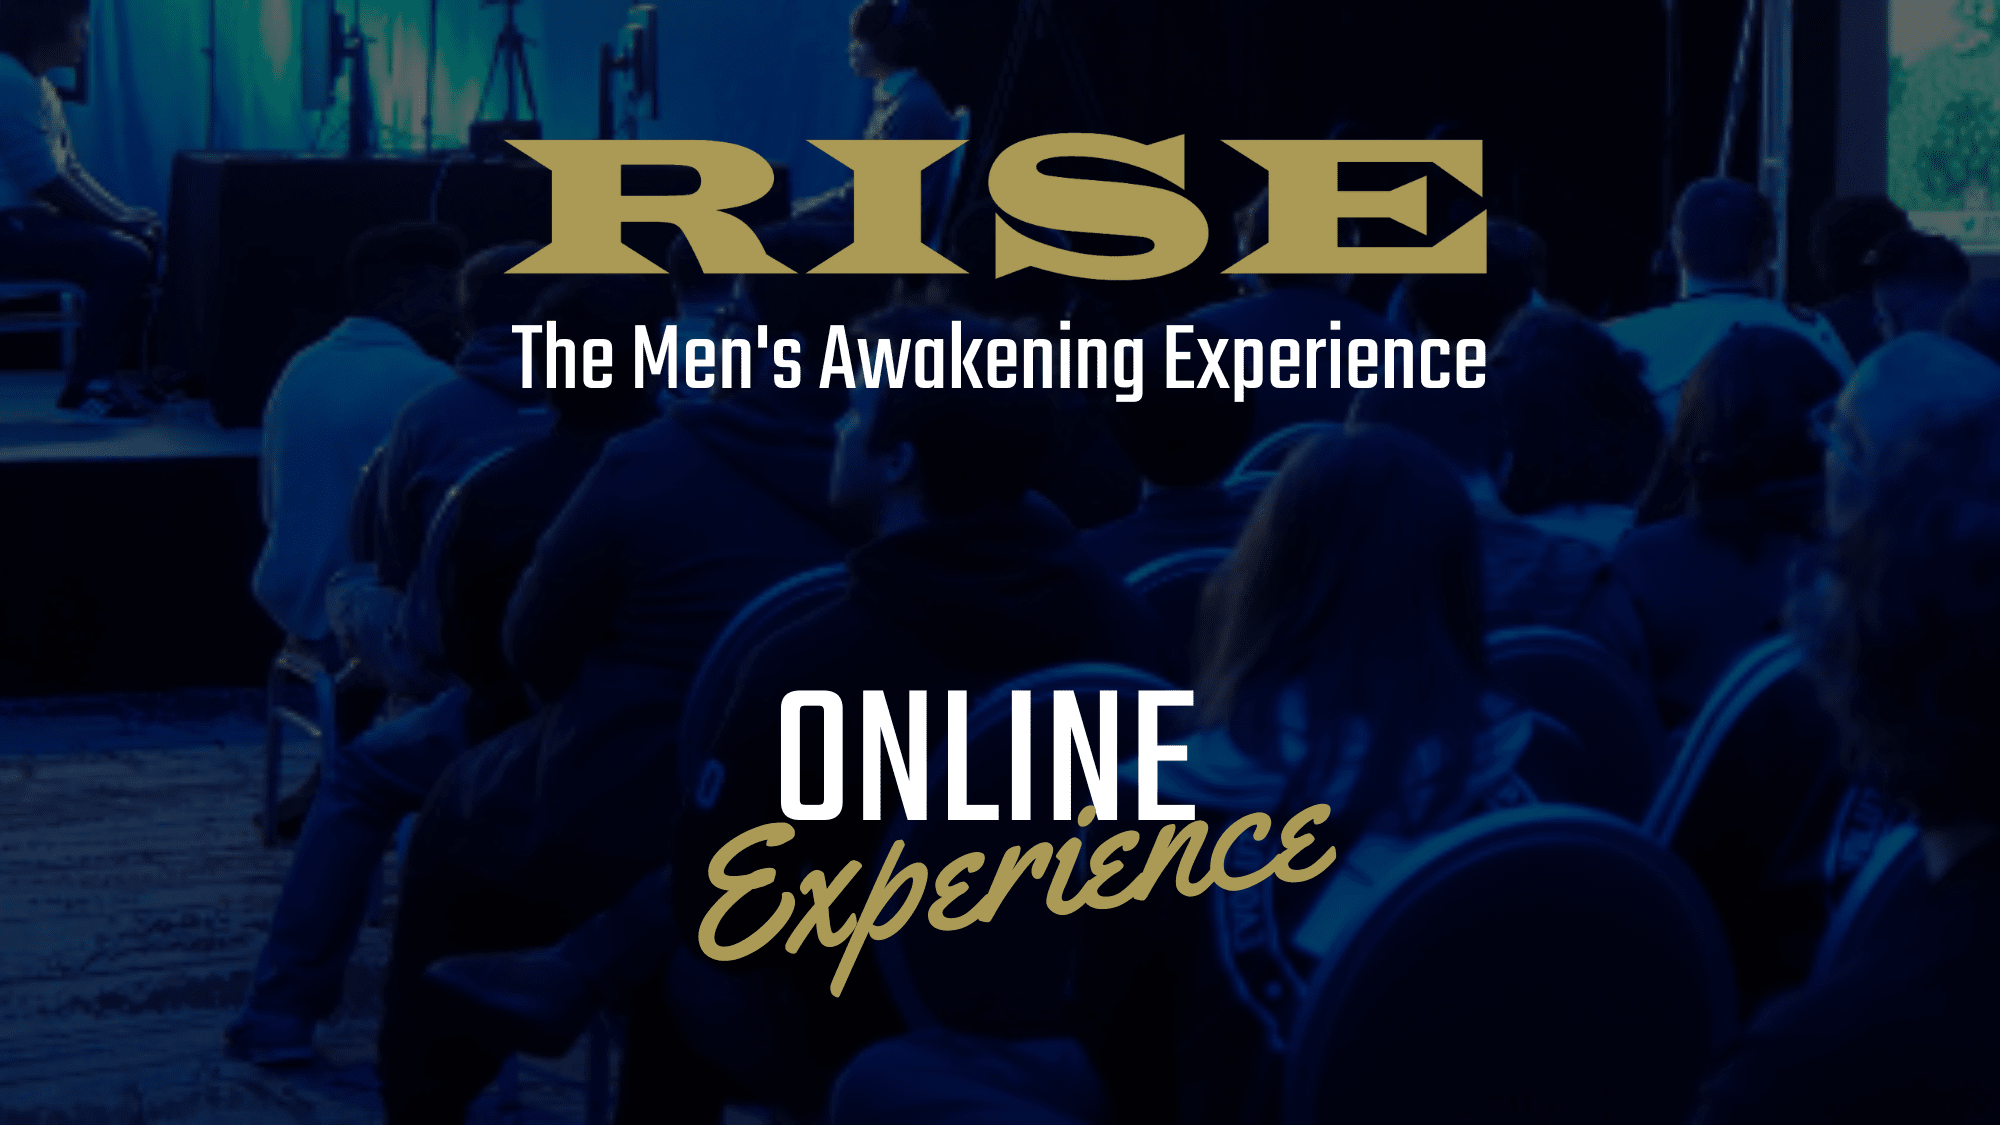 RISE ONLINE EXPERIENCE